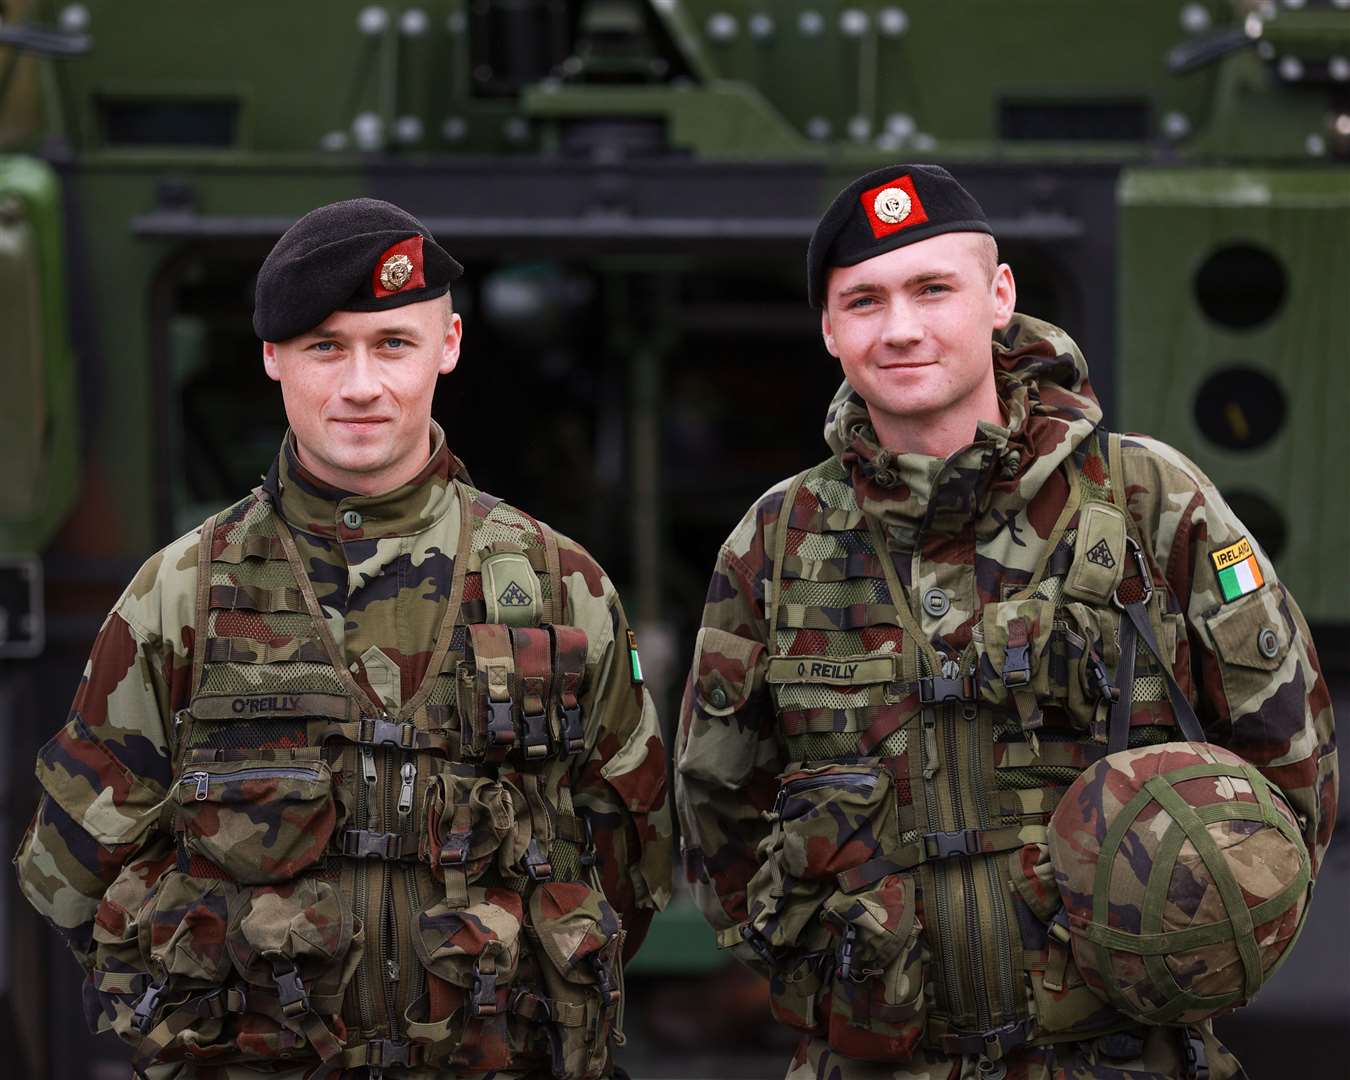 Brothers Pte Caolan O’Reilly (left) and Pte Tiarnan O’Reilly during a deployment mission readiness exercise at Glen of Imaal, Co Wicklow (Liam McBurney/PA)